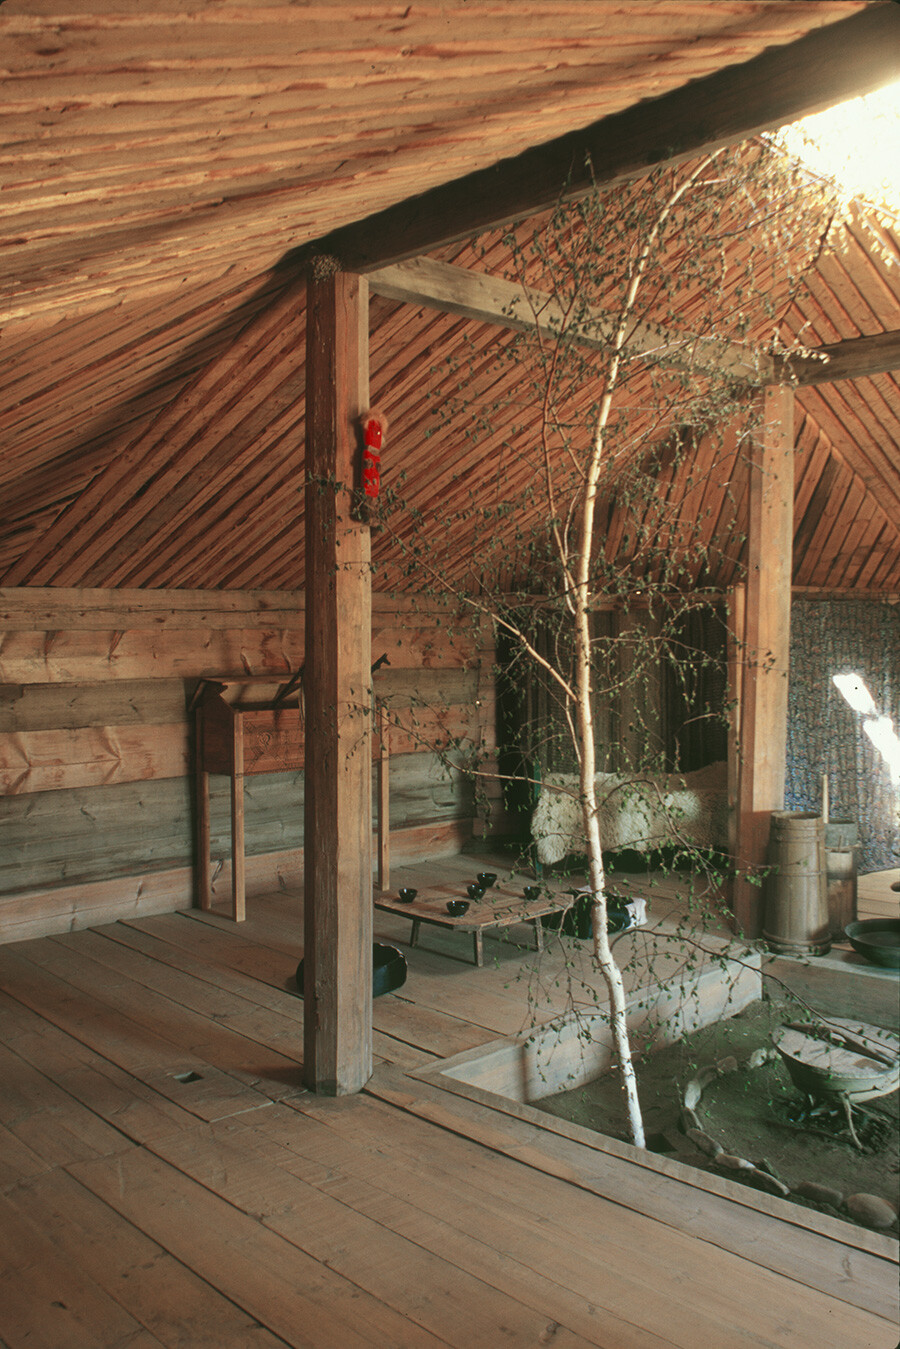 Taltsy. Interior of Buriat yurt with plank roof. Hearth in center. October 2, 1999